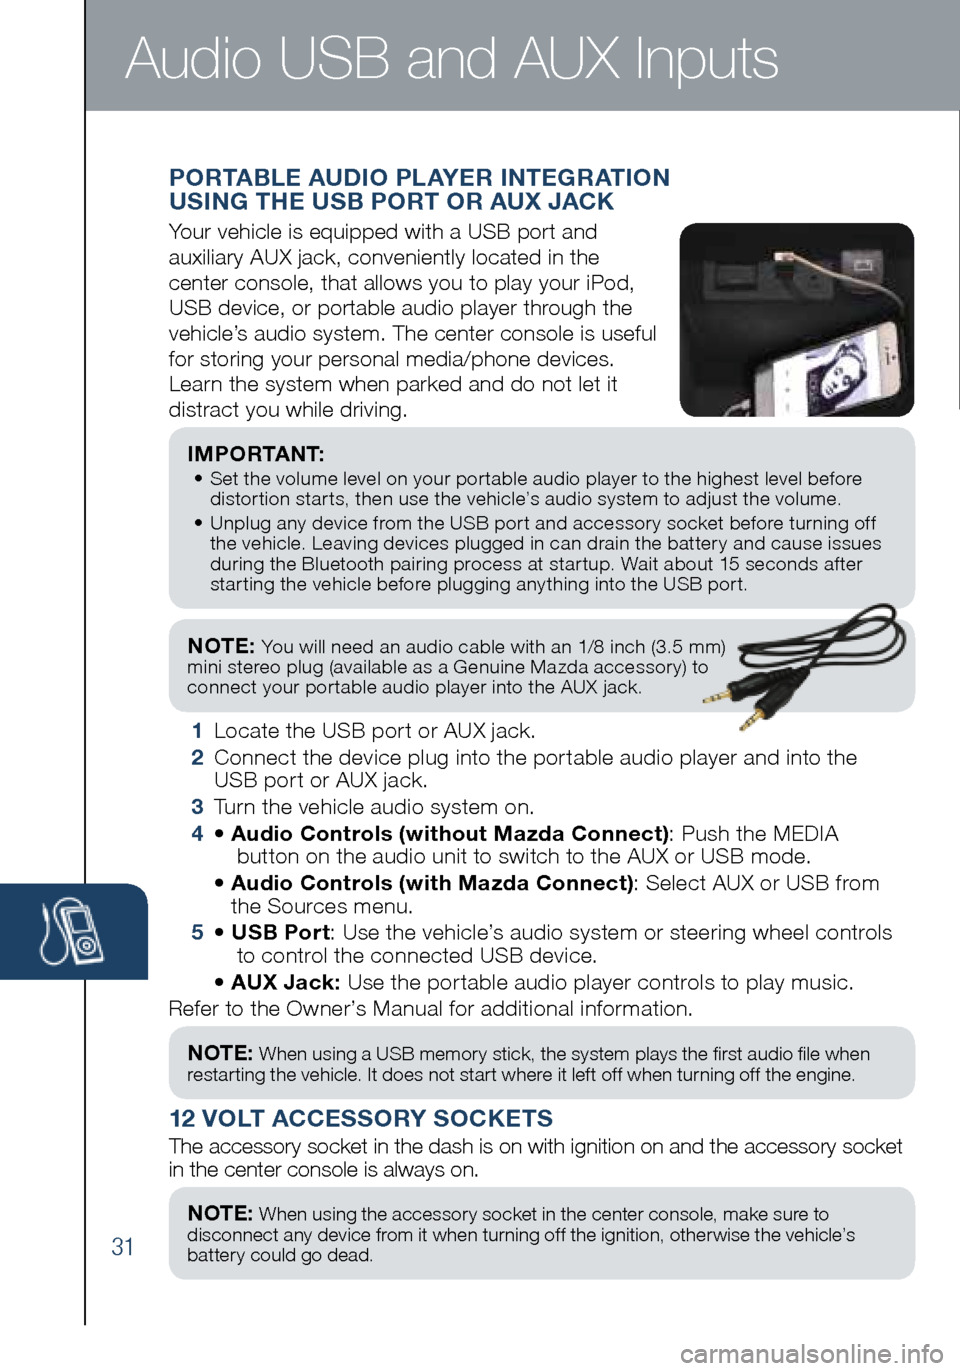 MAZDA MODEL 6 2016  Smart Start Guide (in English) 31
NOTE: You will need an audio cable with an 1/8 inch (3.5 mm)  
mini stereo plug (available as a Genuine Mazda accessory) to   
connect your portable audio player into the AUX  jack. 
I M P O R TA N